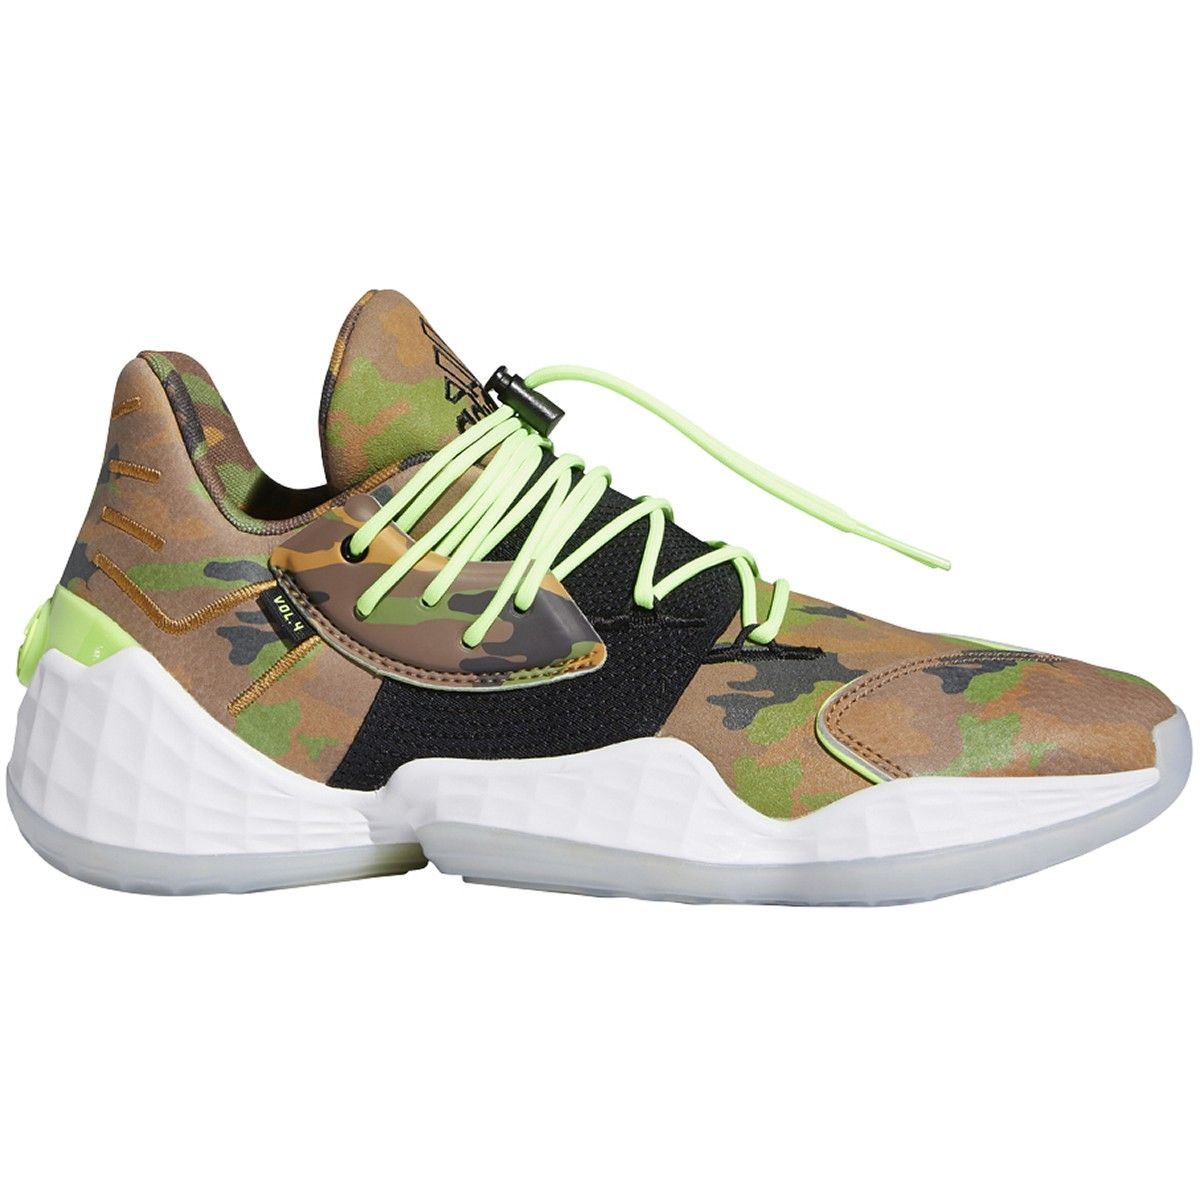 personal Bermad fusible adidas James Harden x Daniel Patrick Mens Basketball Shoes in Camo | FY2789